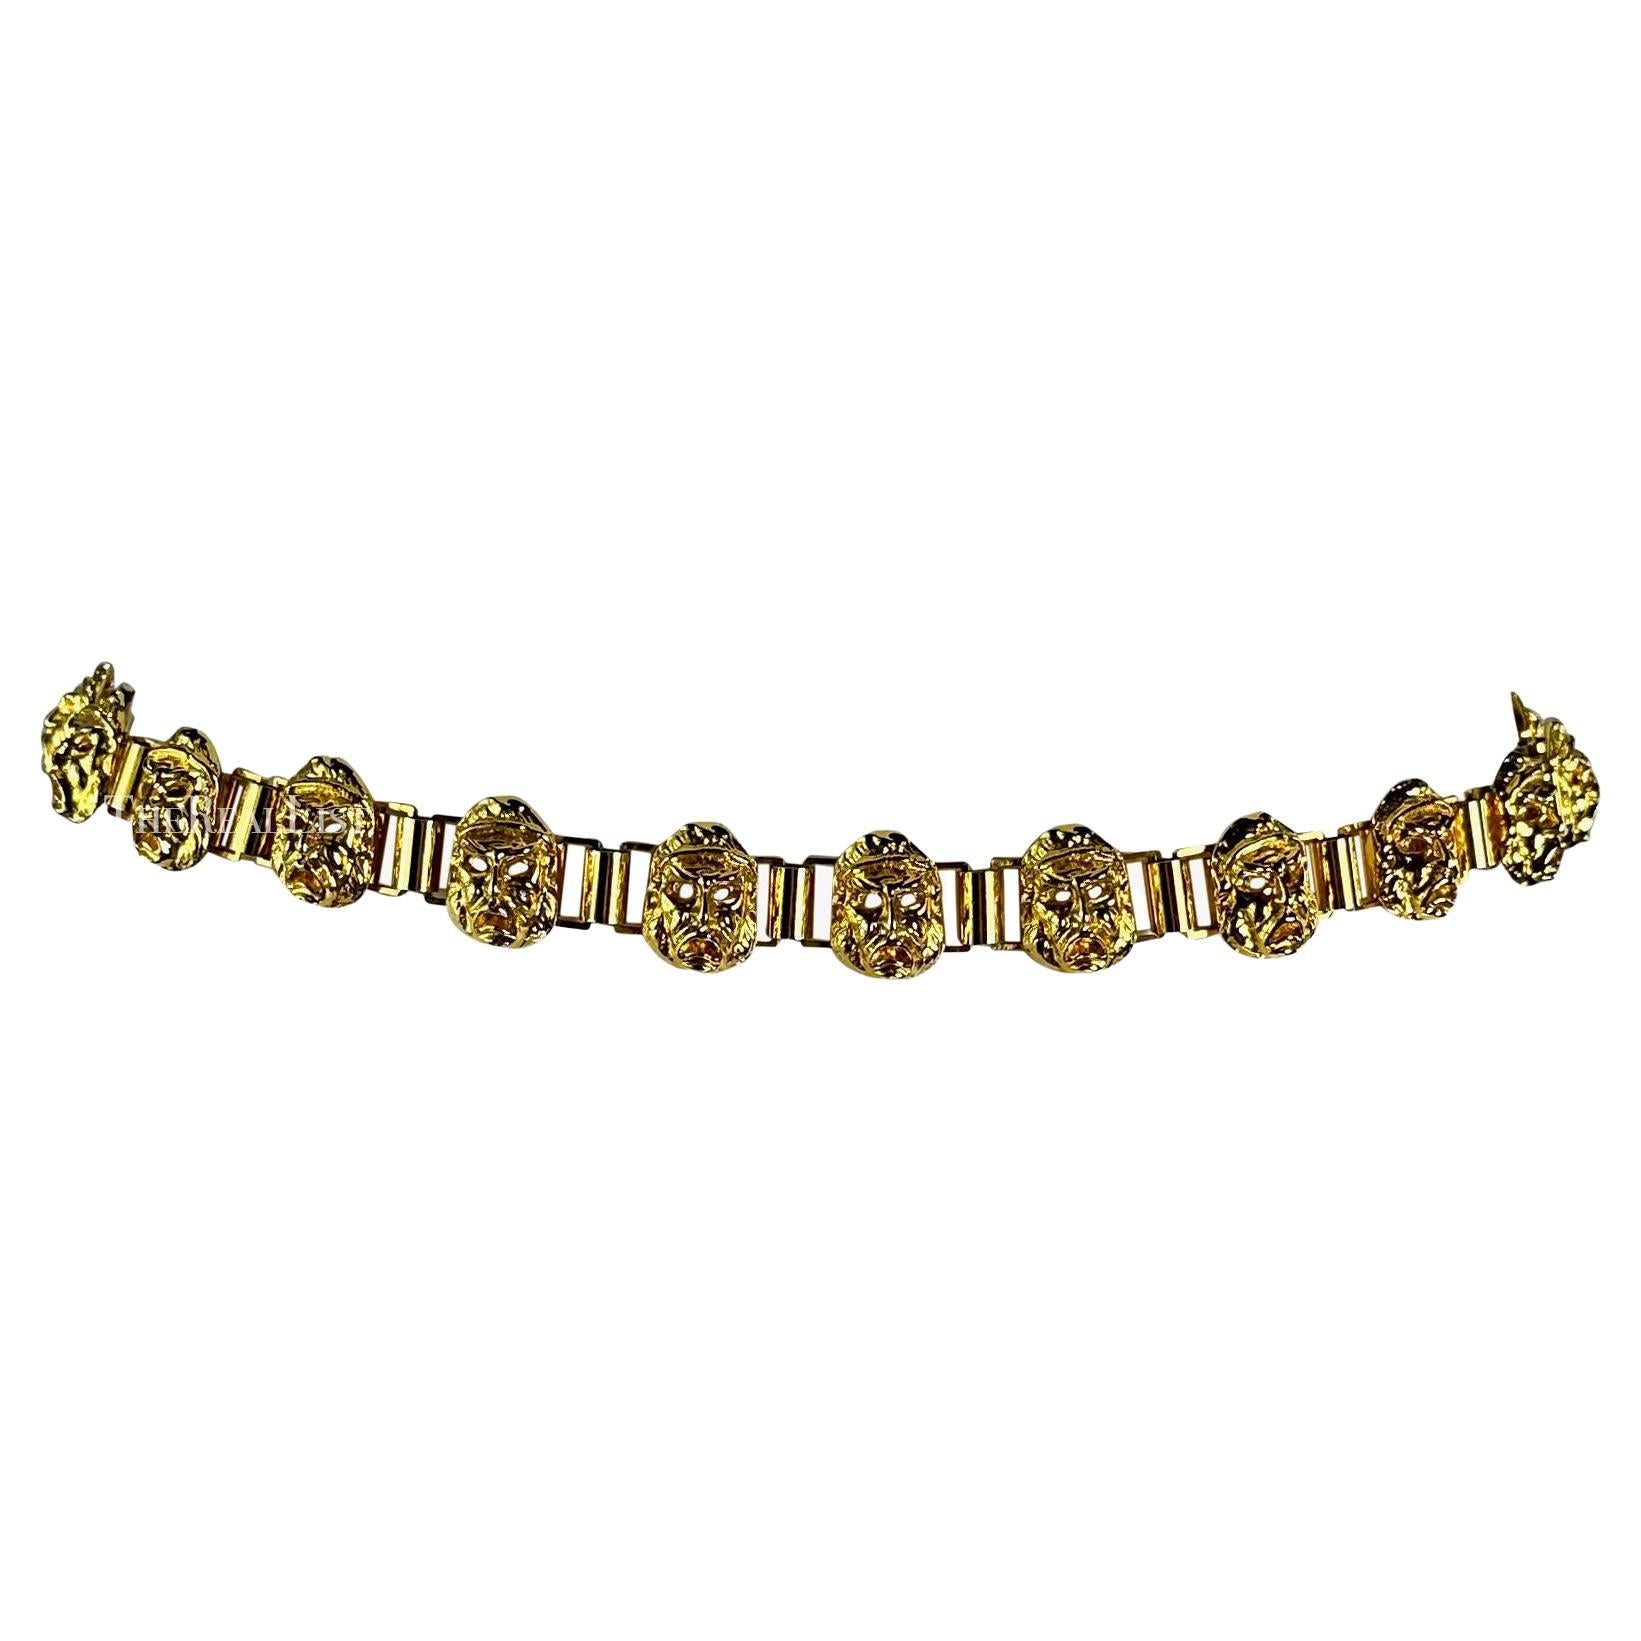 S/S 1992 Gianni Versace Gold Tone Roman Mask Chain Belt  For Sale 6